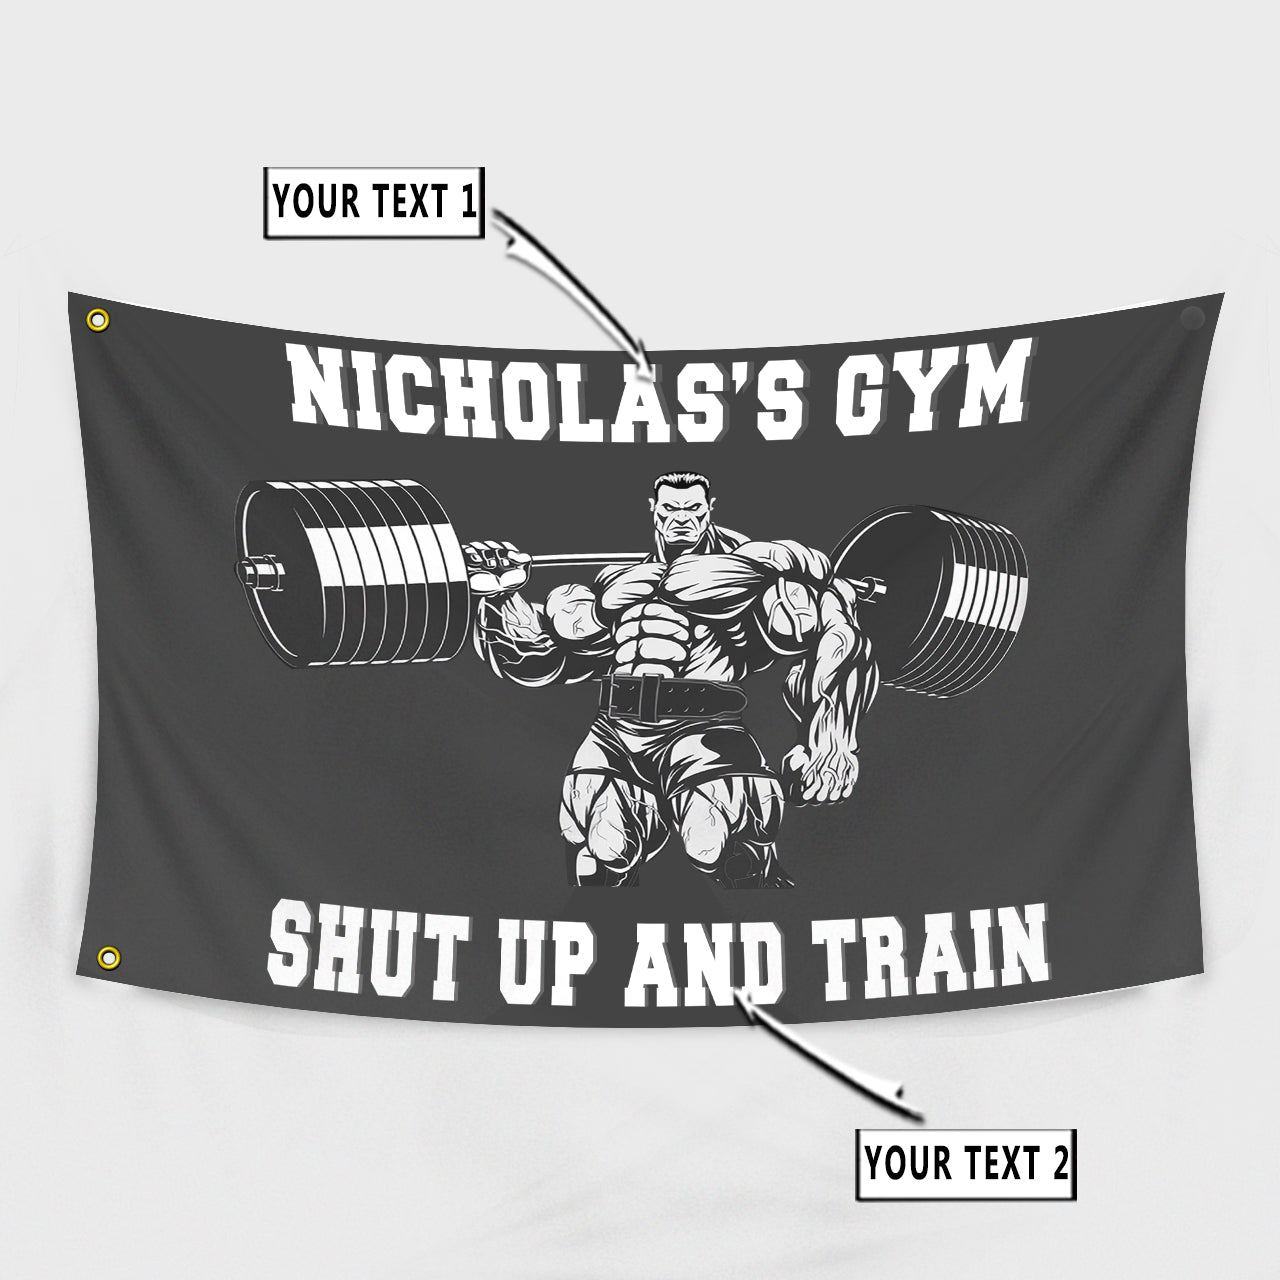 Personalized Bodybuilding Banner Flag Home Gym Decor Gym Gift Muscle Man